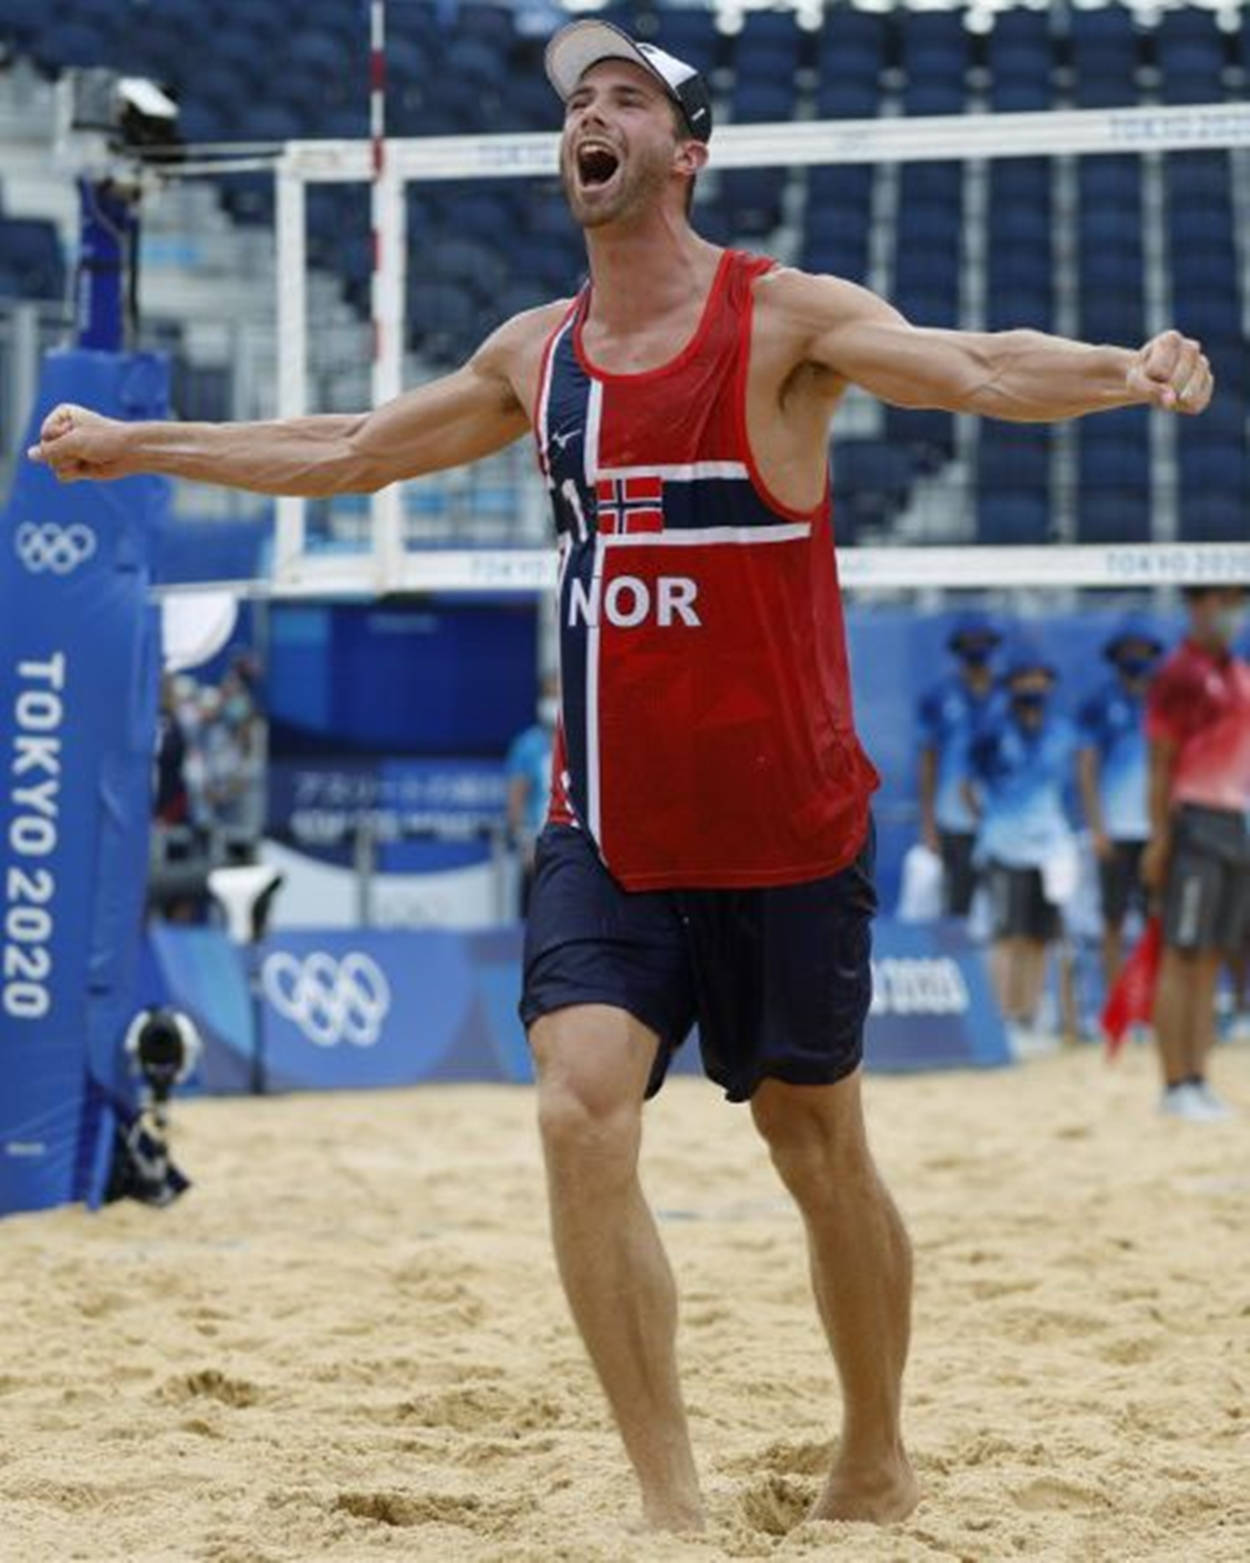 Electrifying Action - Anders Mol of Norway at the Tokyo 2020 Olympics Beach Volleyball Competition Wallpaper